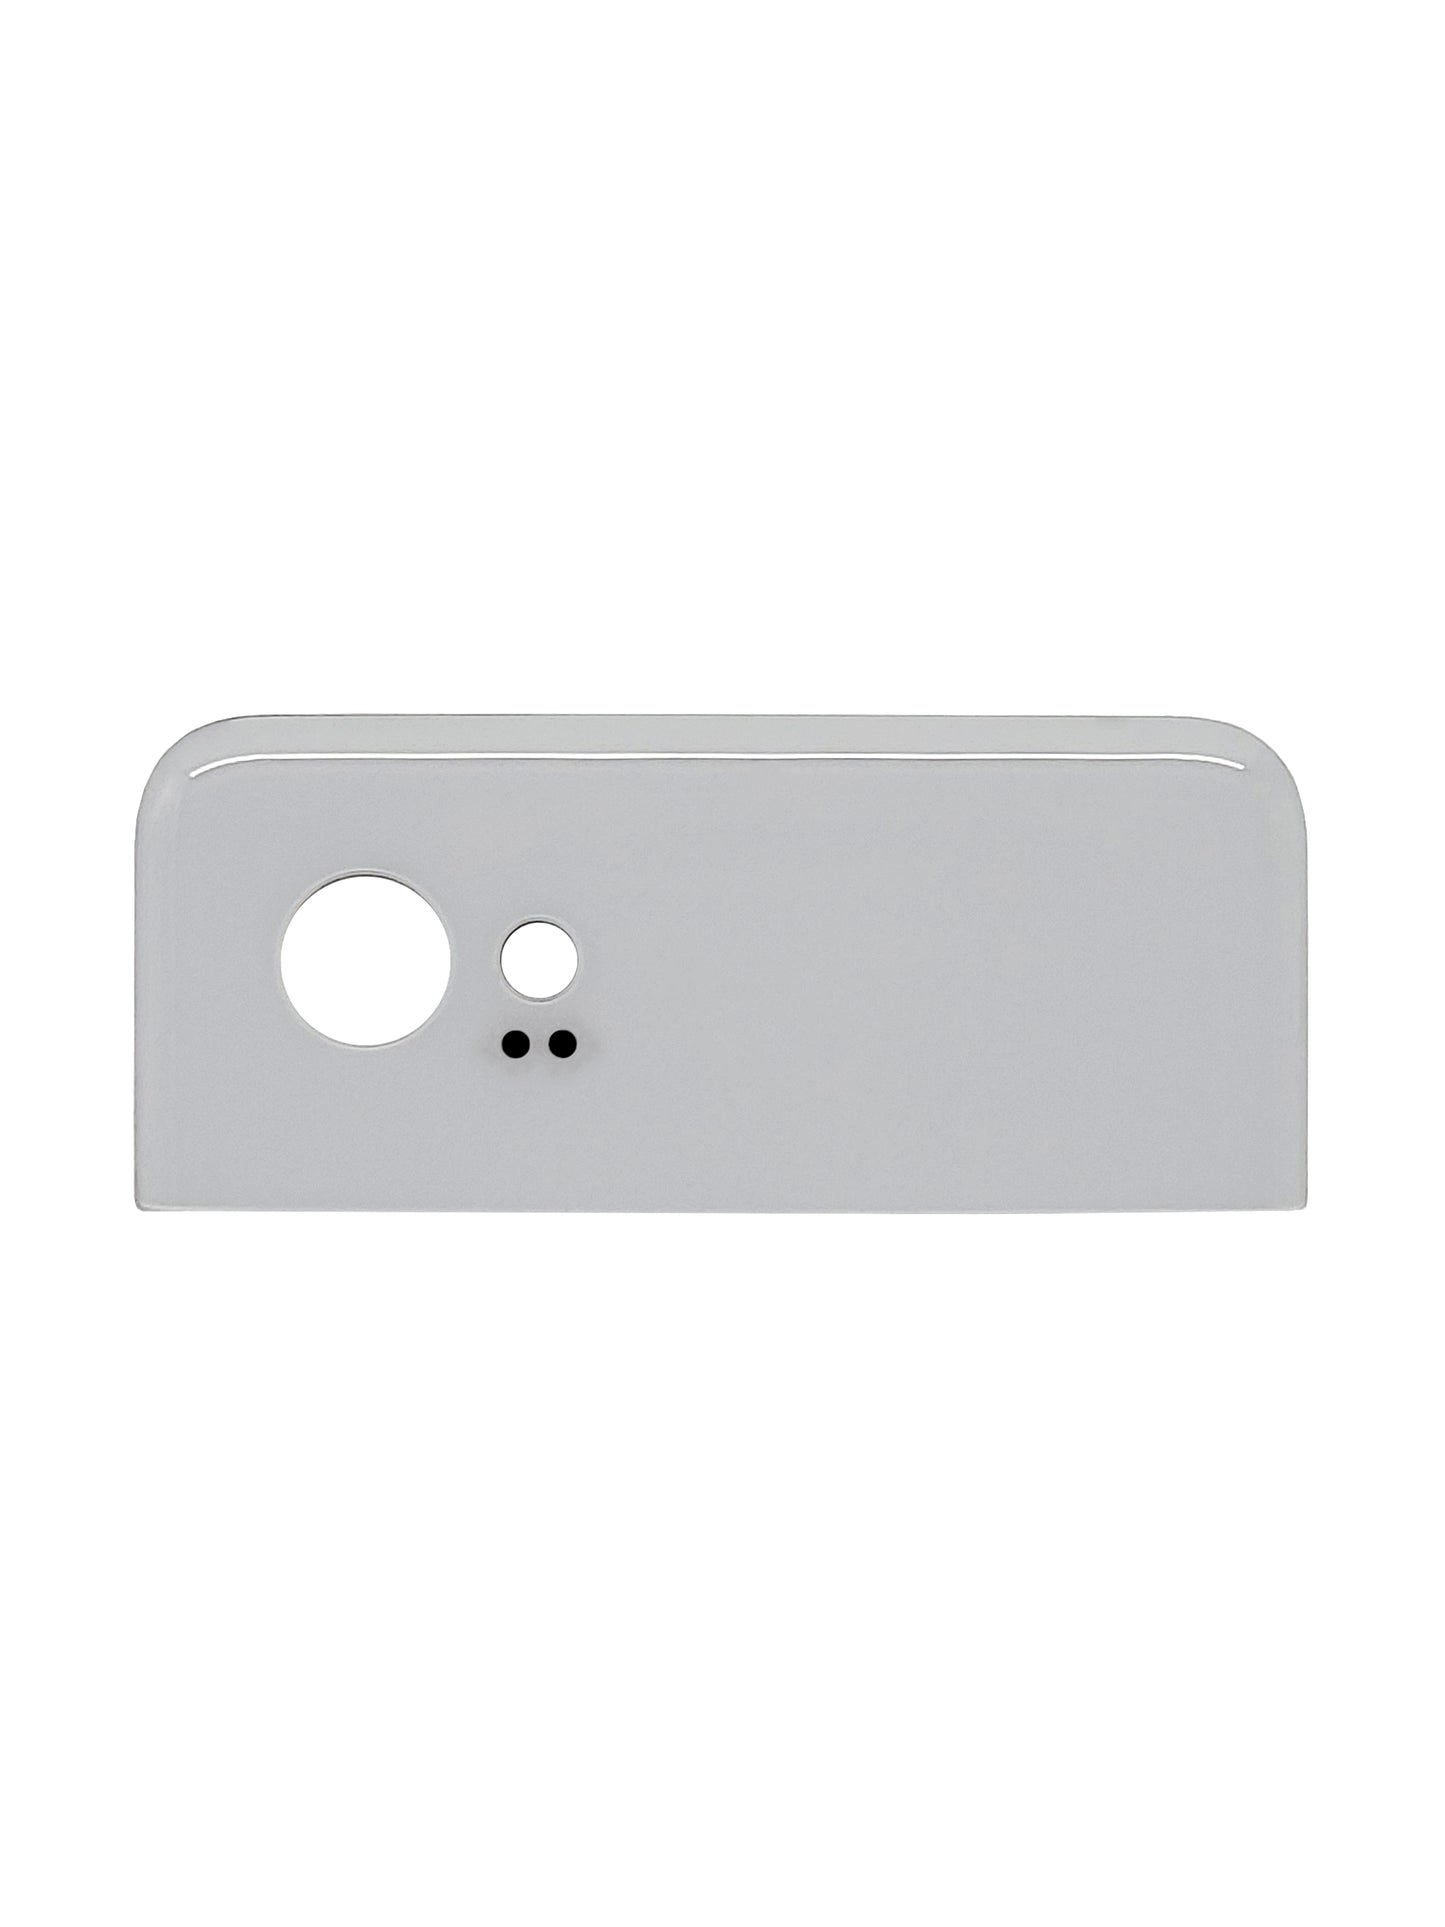 GOP Pixel 2 XL Top Back Cover (White)